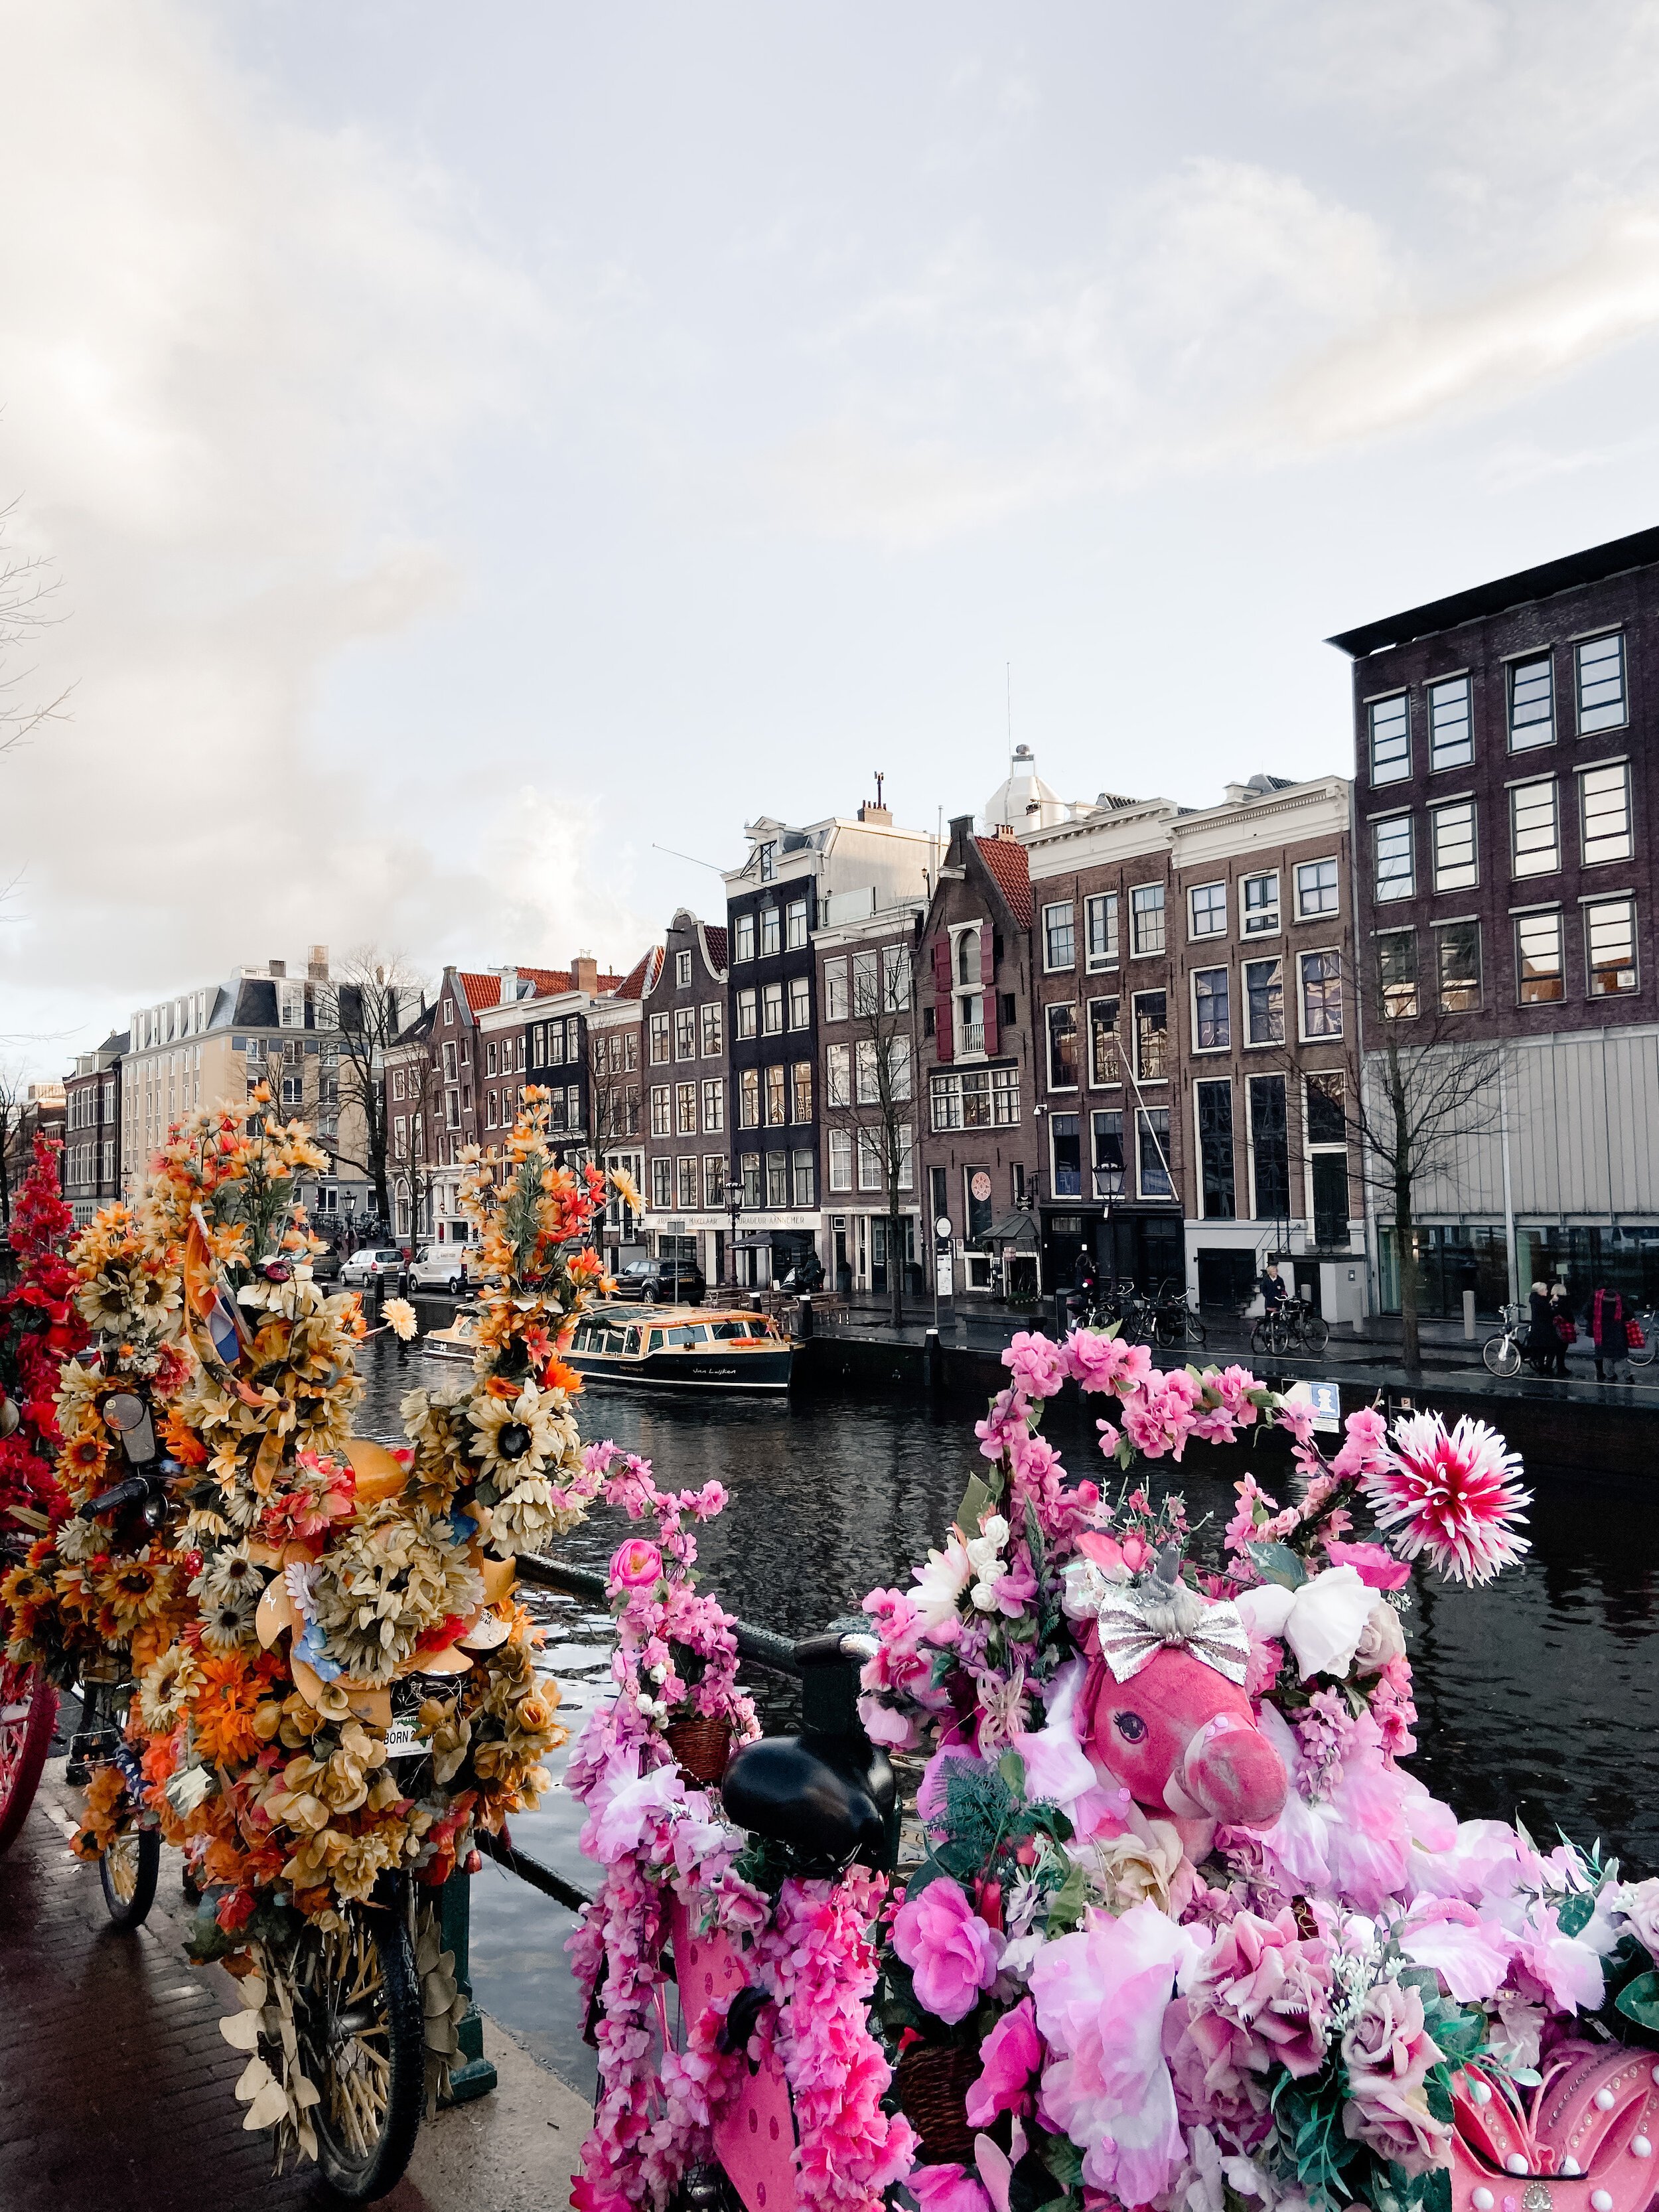 36 hours in Amsterdam